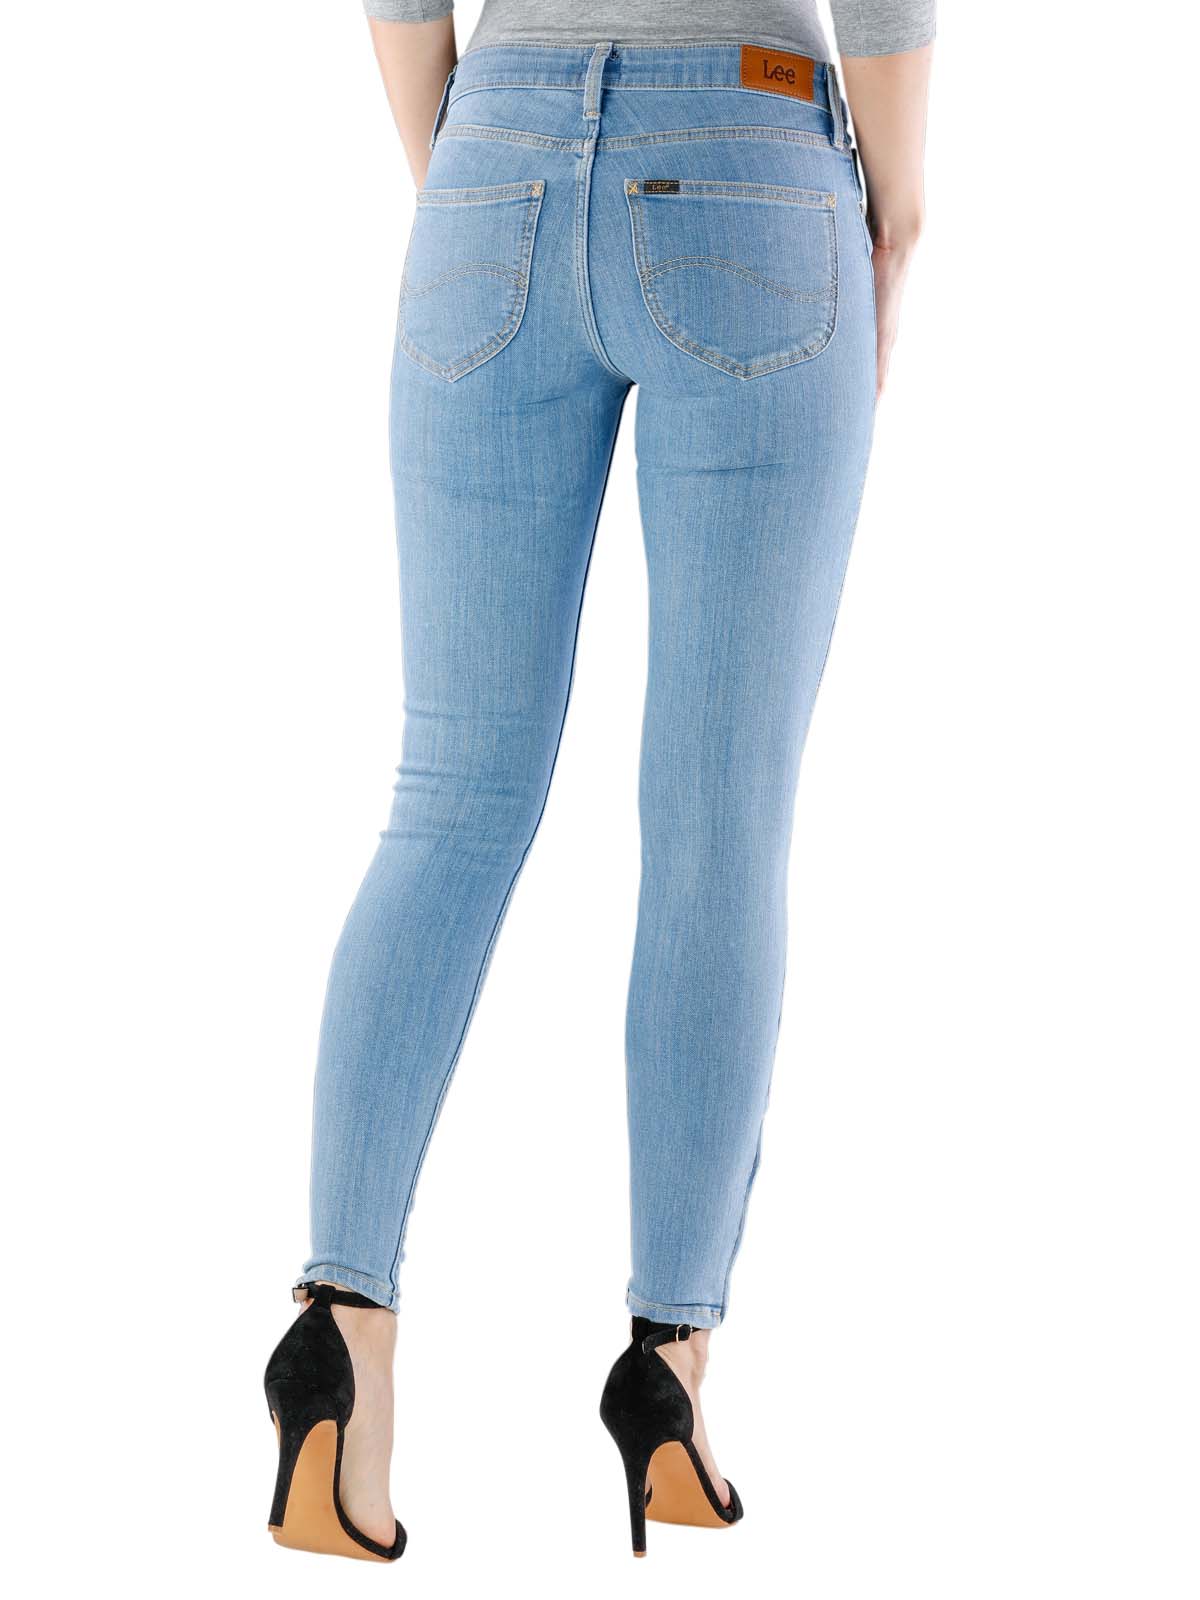 lee stretch jeans womens